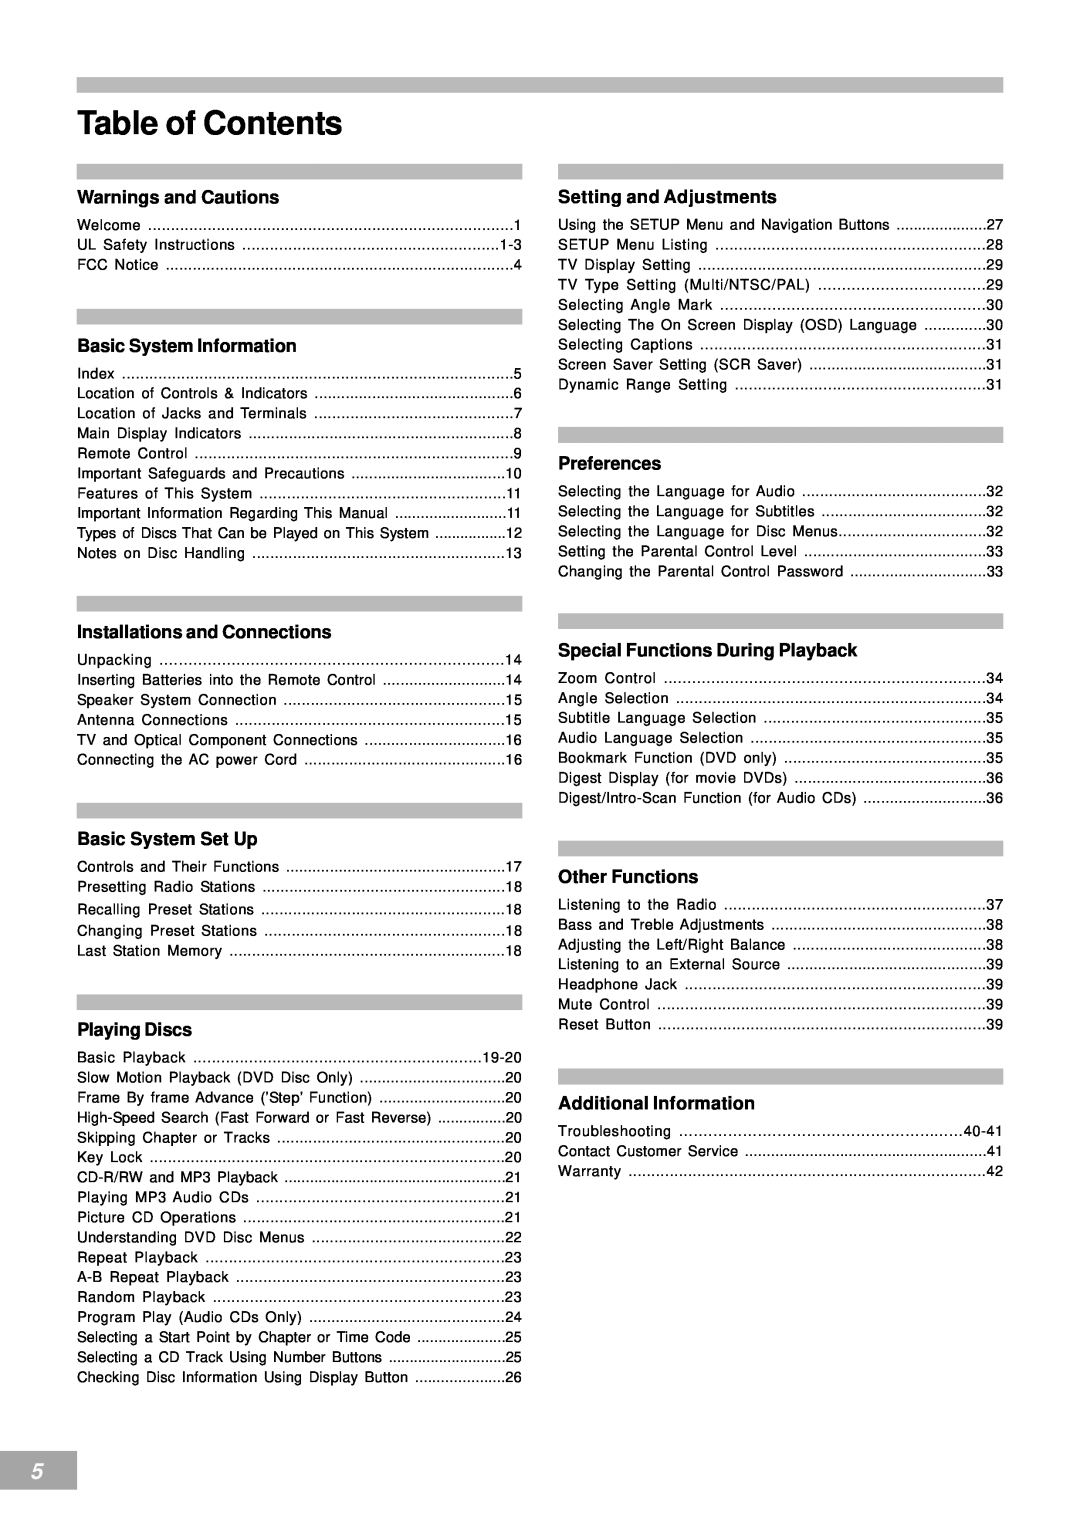 Emerson AV50 owner manual Table of Contents 